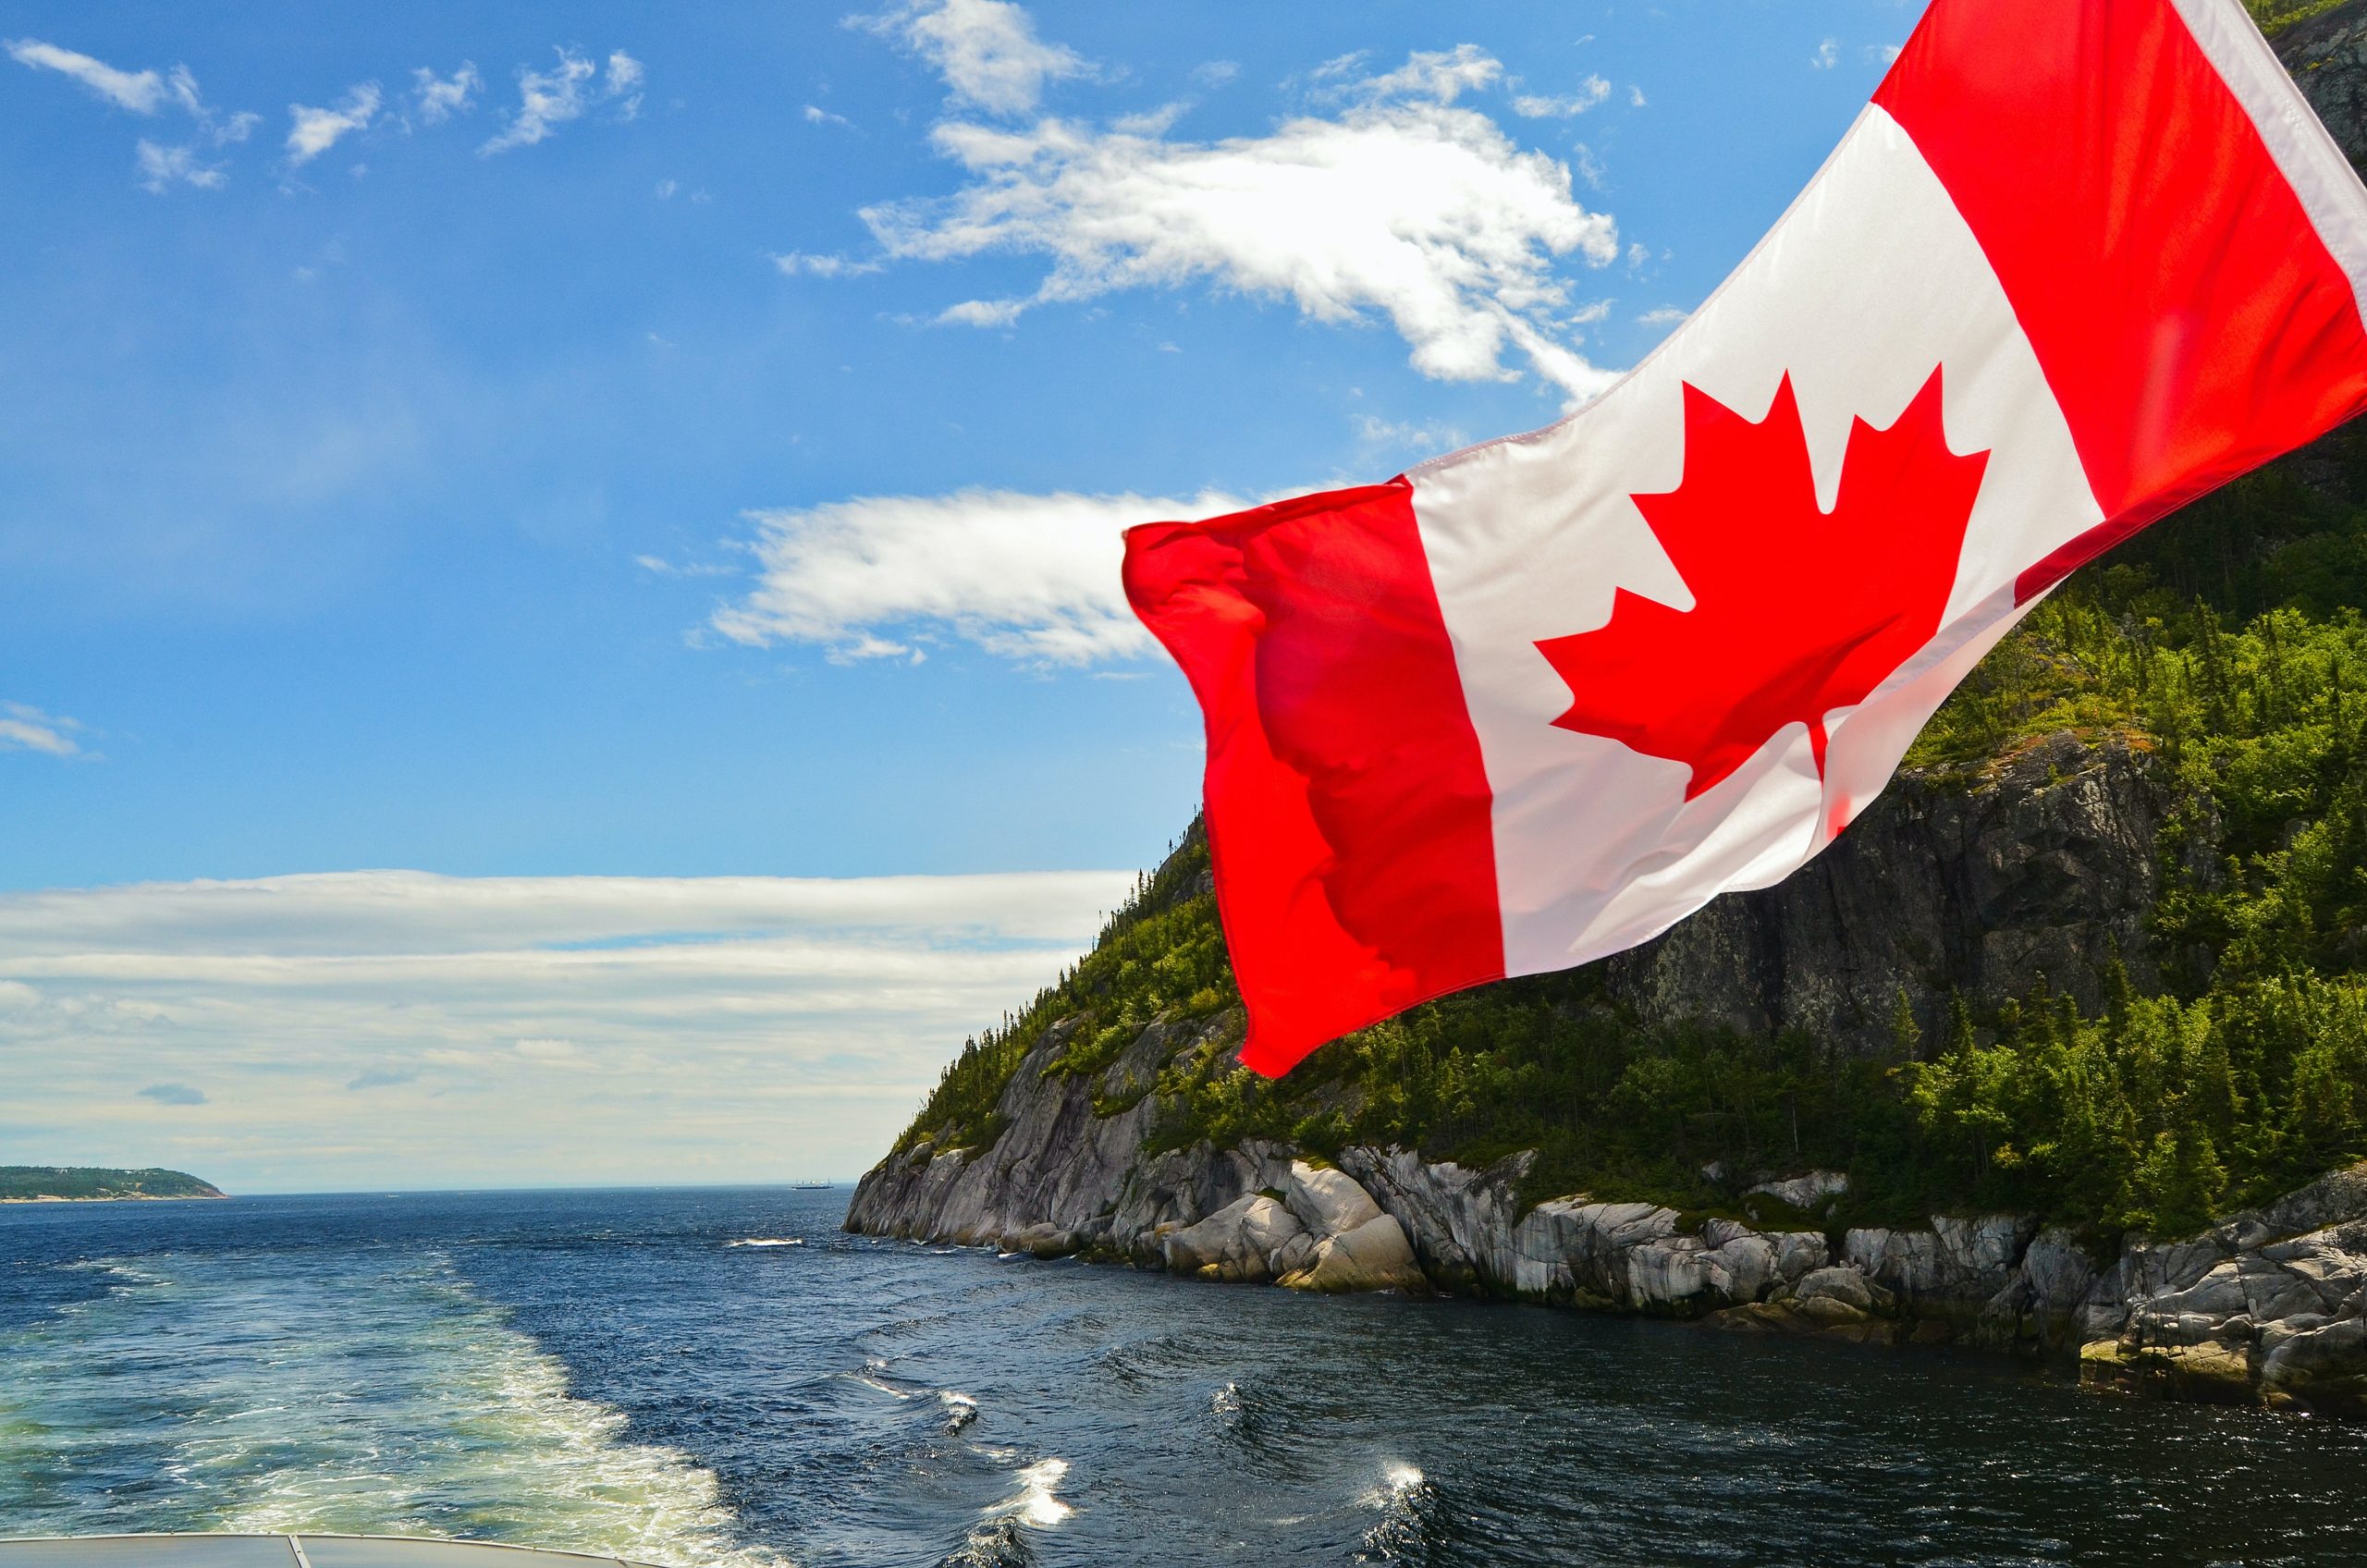 list of recruiters in Canada licensed to find foreign workers for employment in Canada, or to find employment in Canada for foreign workers.